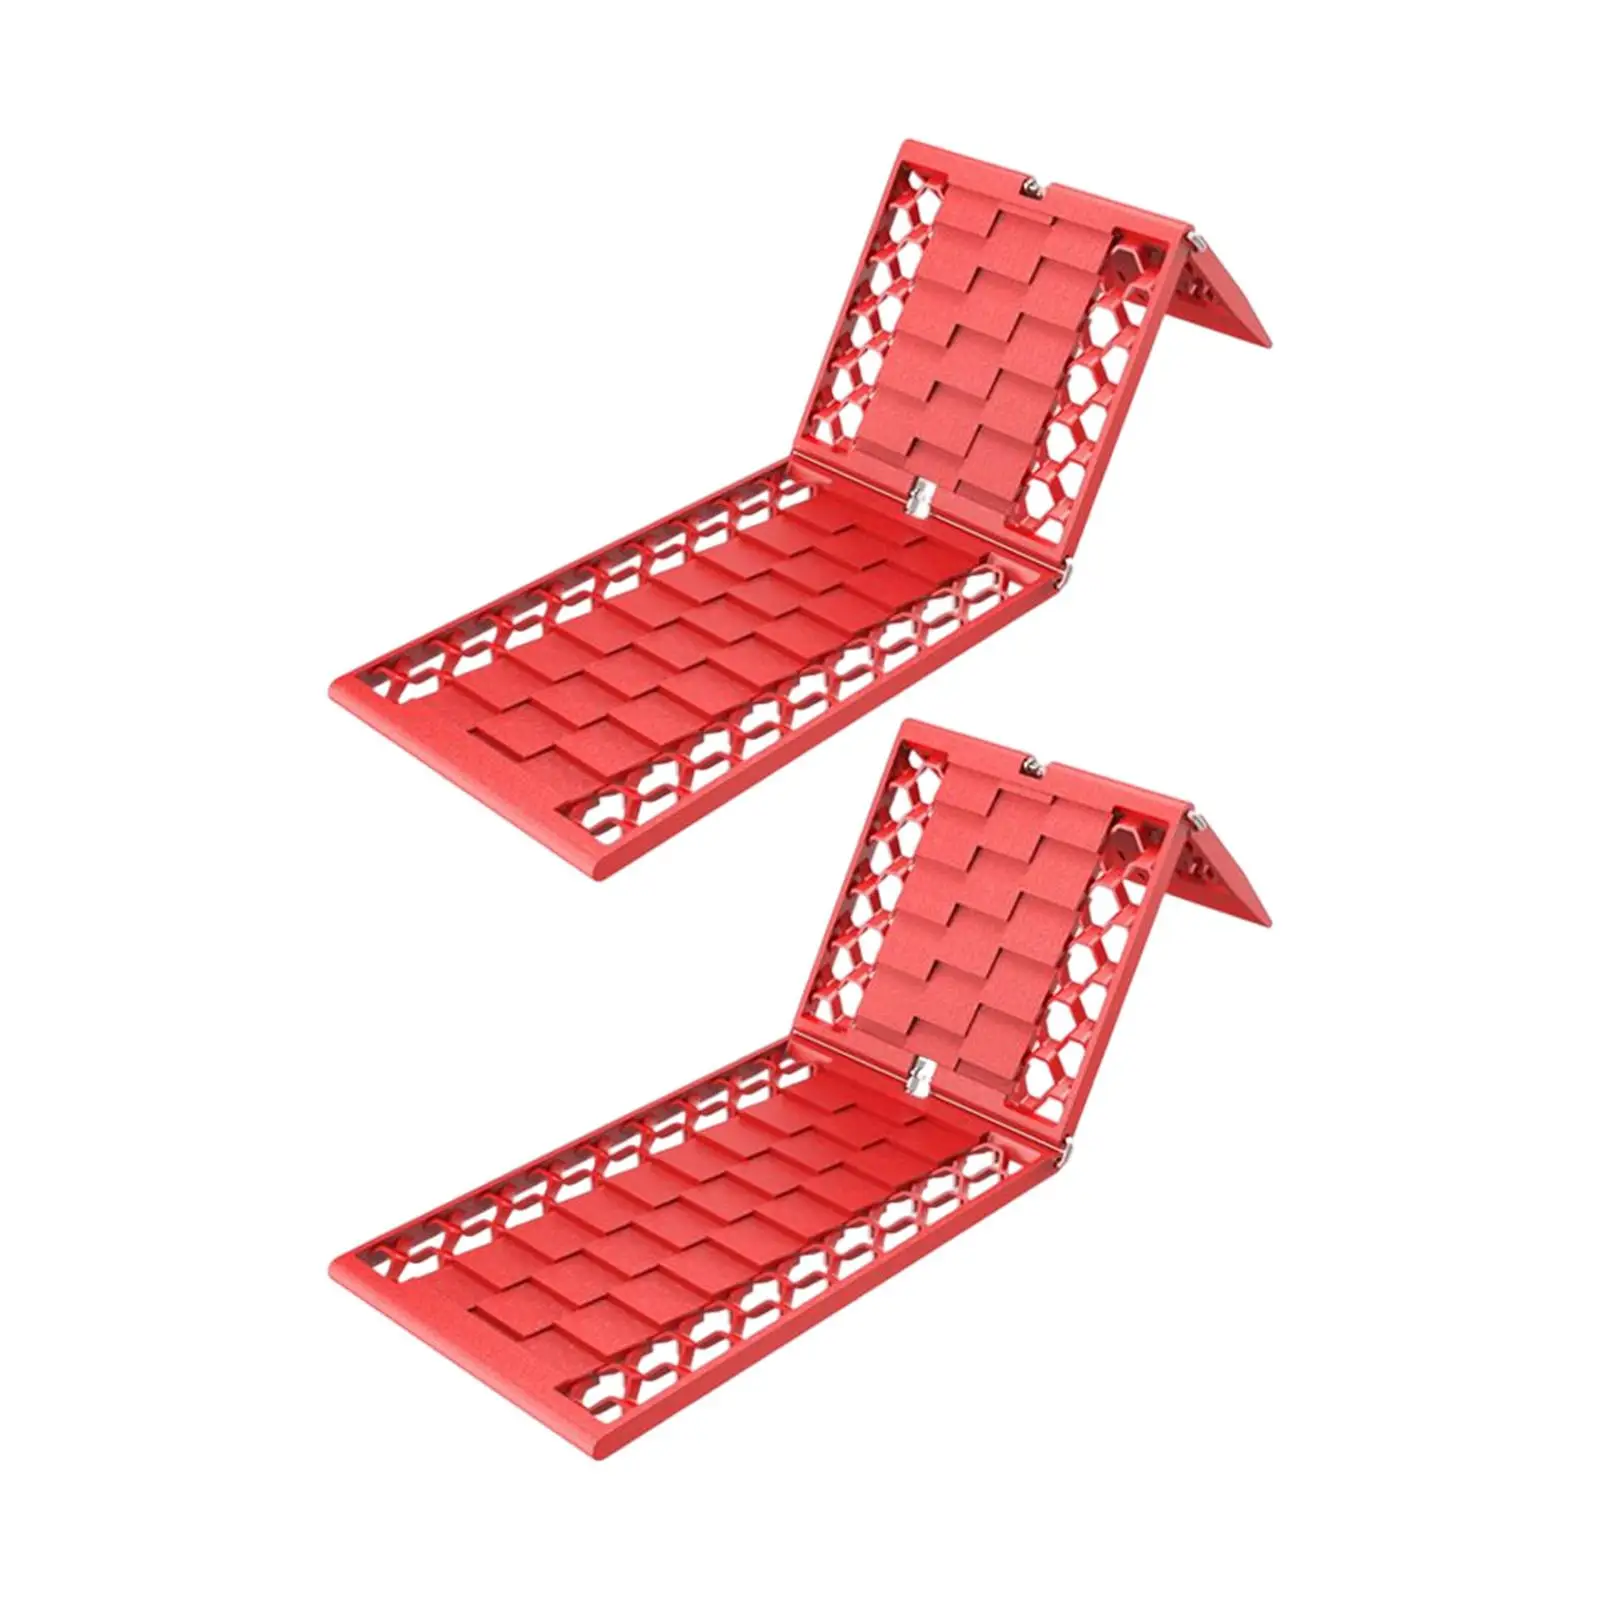 2x Foldable Traction Boards Wheel Tire Ladder for Soft Ground Terrains